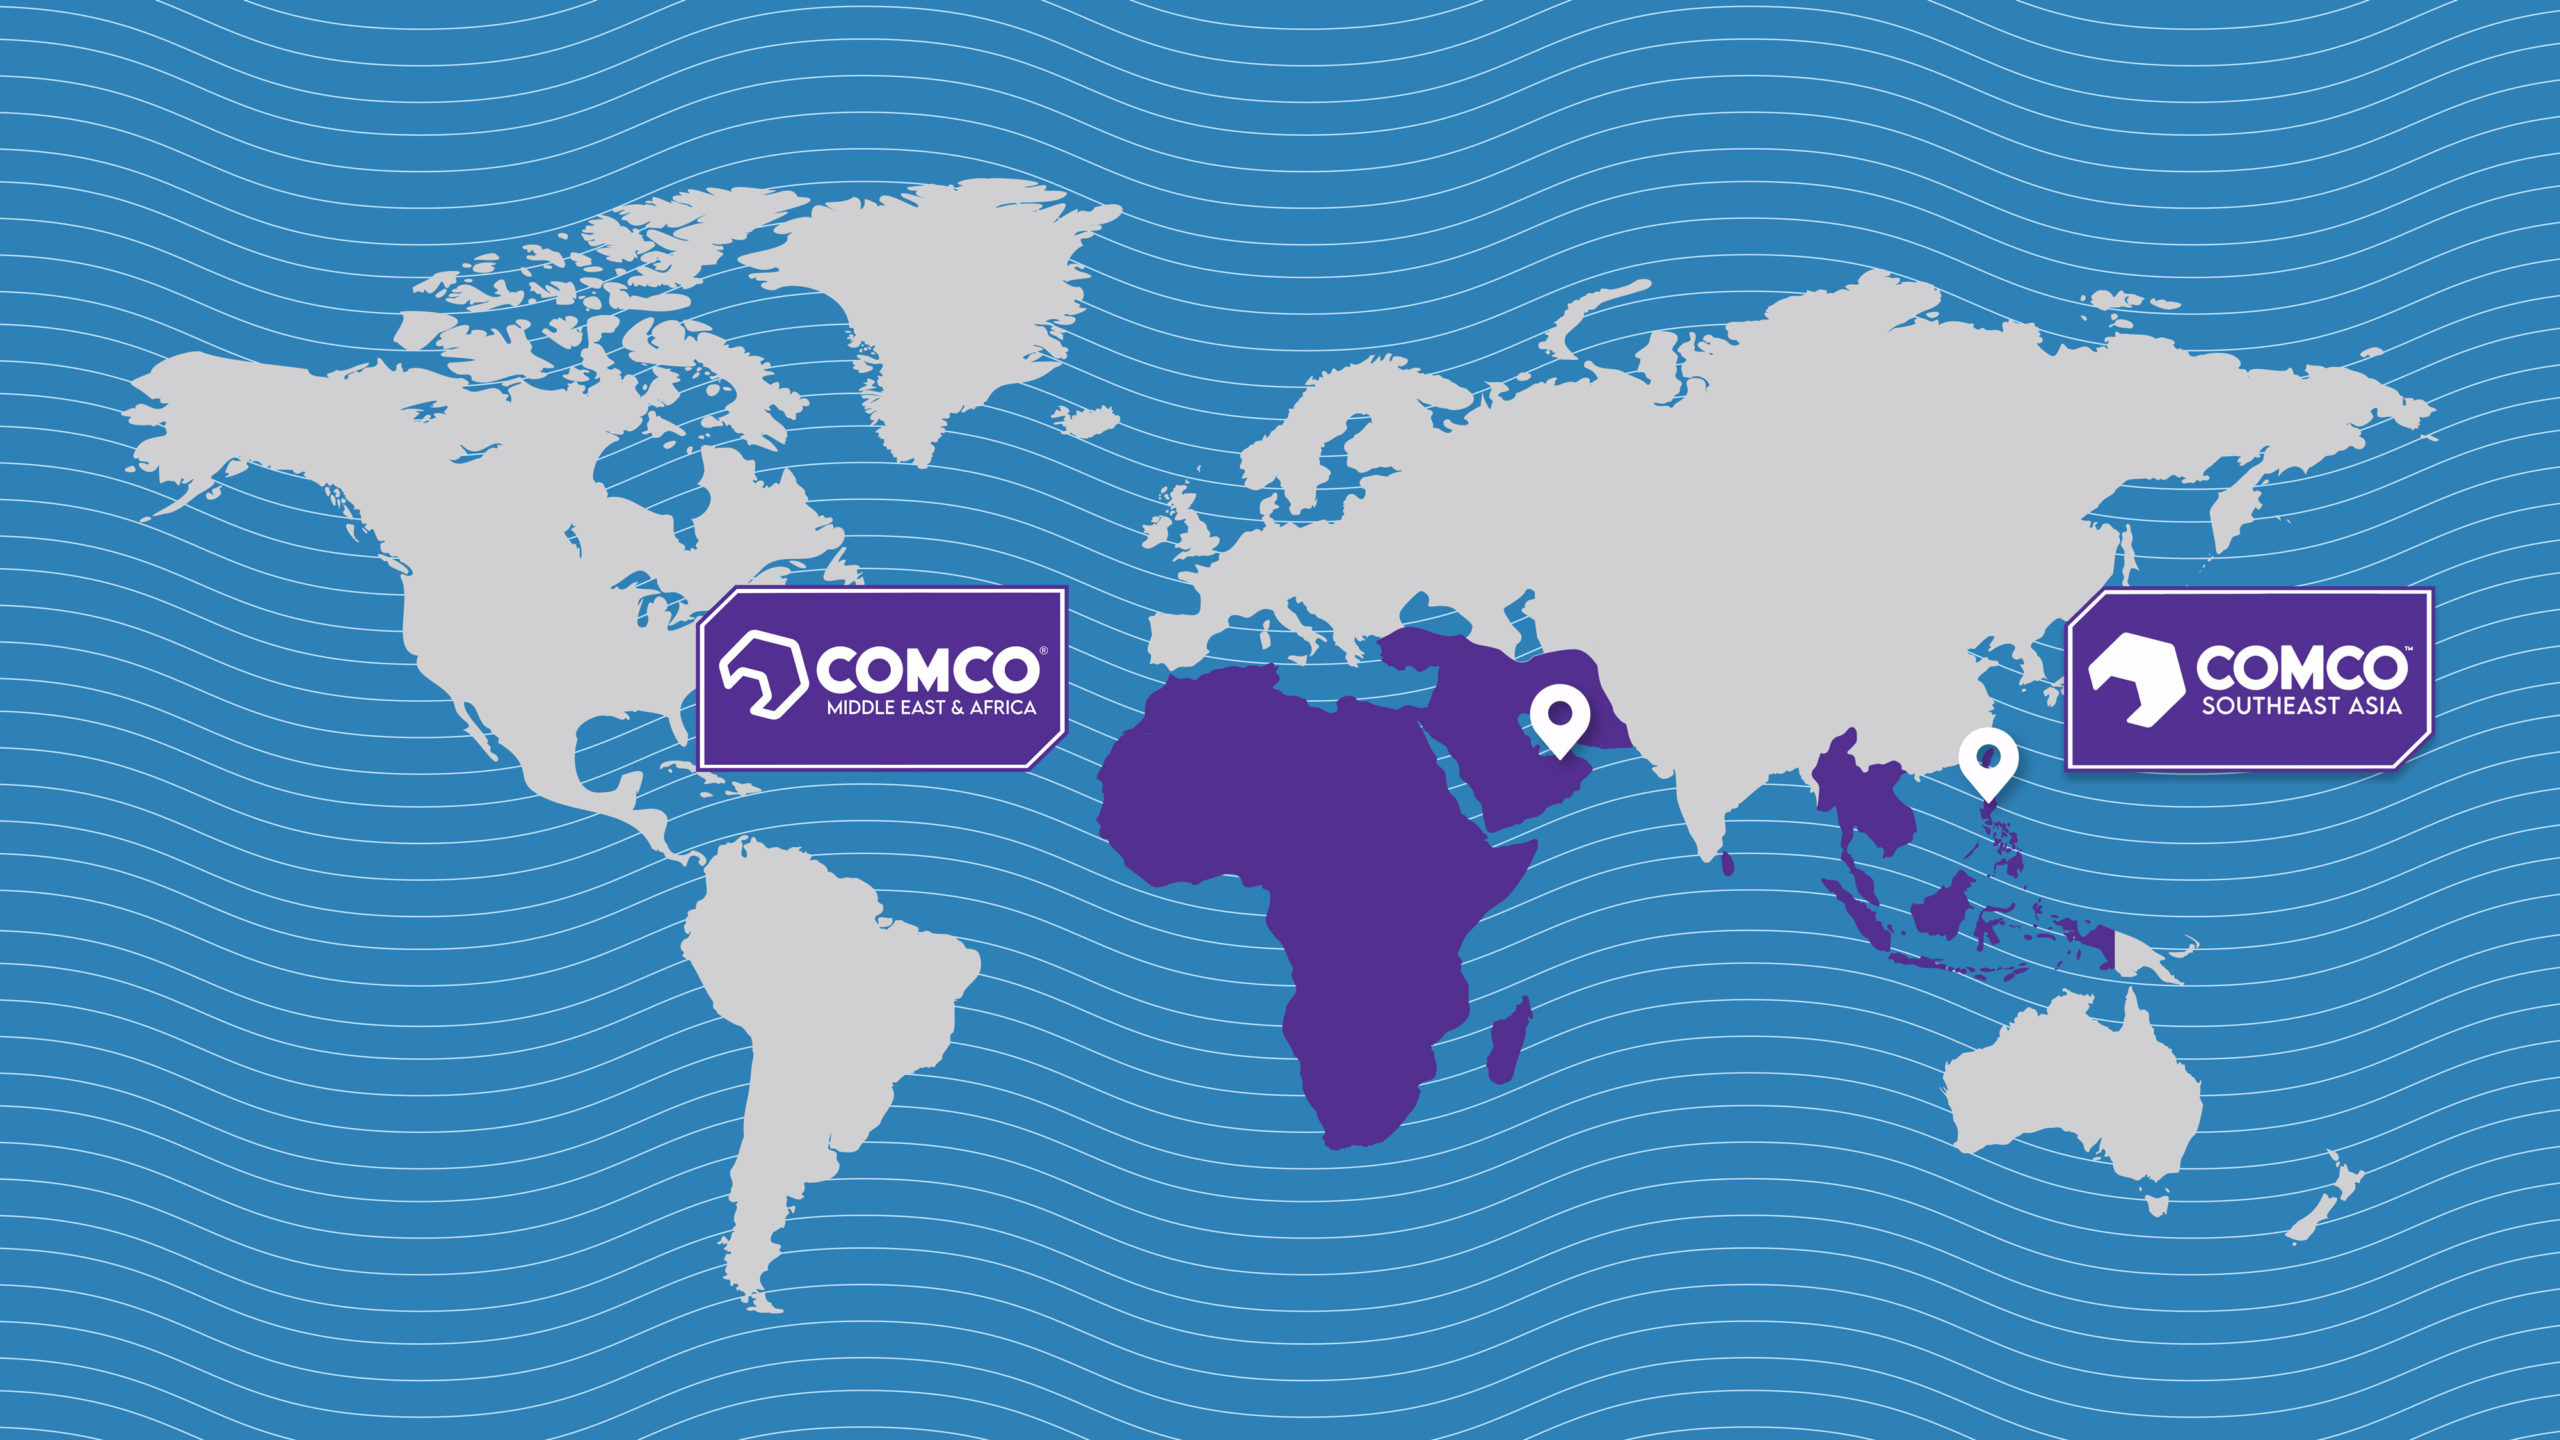 COMCO Southeast Asia Middle East and Africa New PR Smart Social